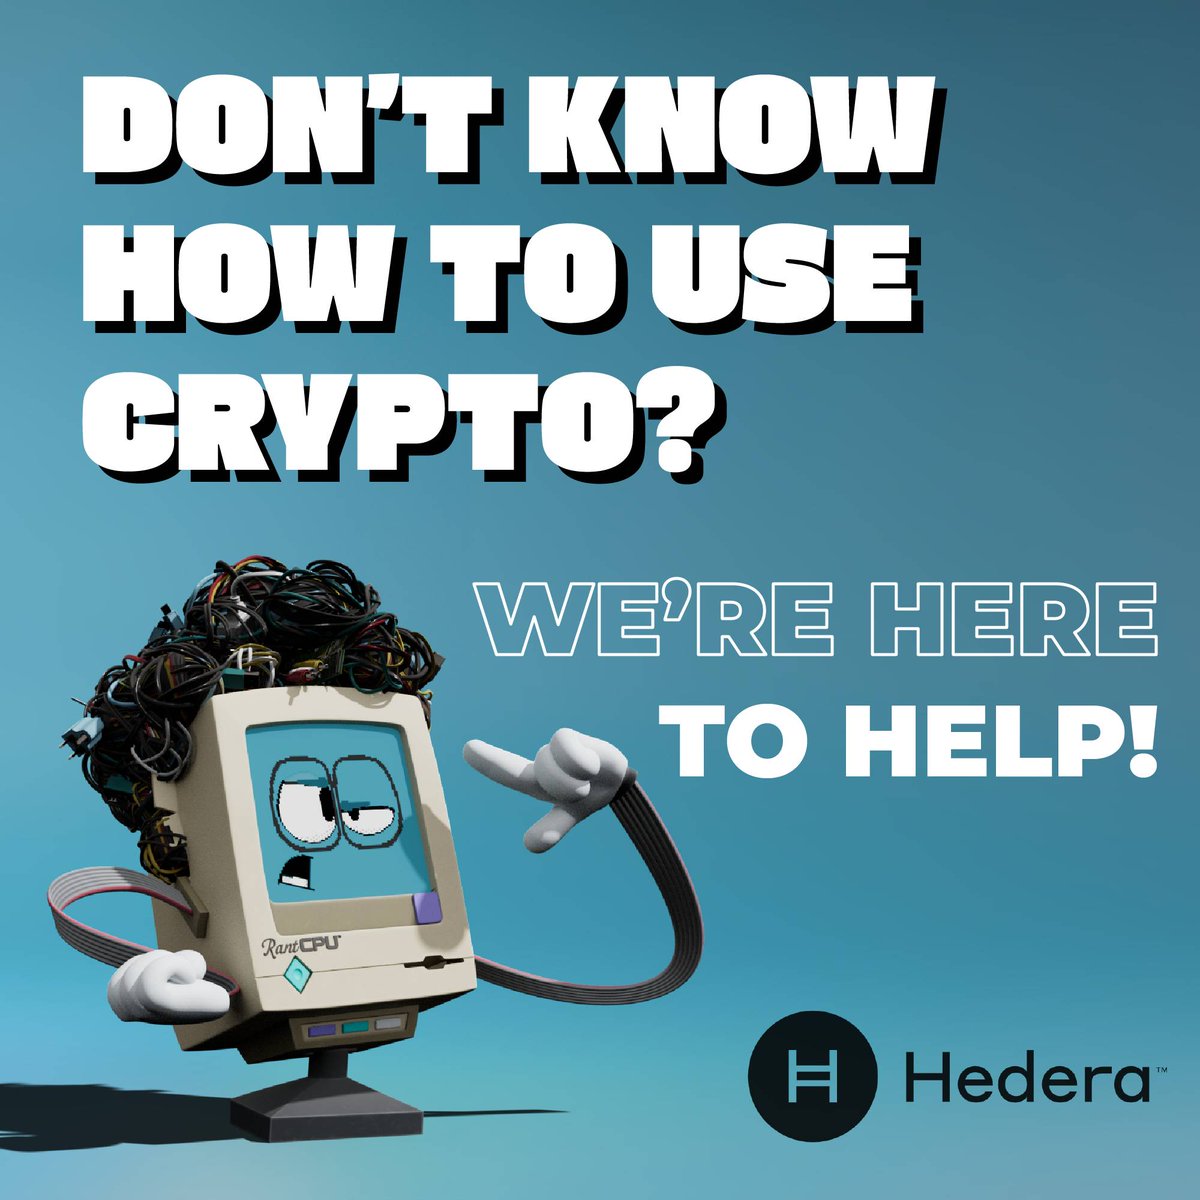 Are you ready for our pre-sale?! Do you want to buy the cards, but don't know how to use crypto / @Hedera? 
We're here to help! 
Reach out to us on Discord here 👉discord.gg/liithos 🖥️🤝